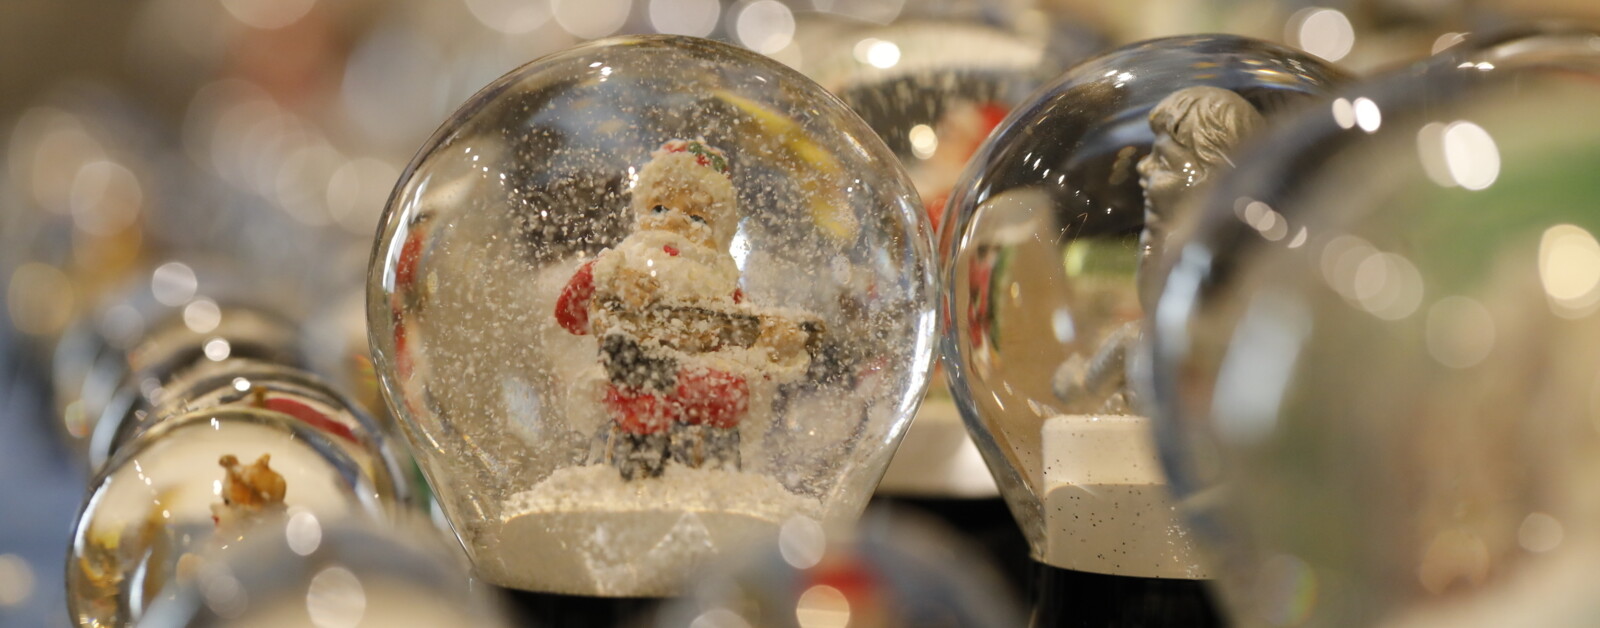 Snow globes from the Viennese snow globe maker 